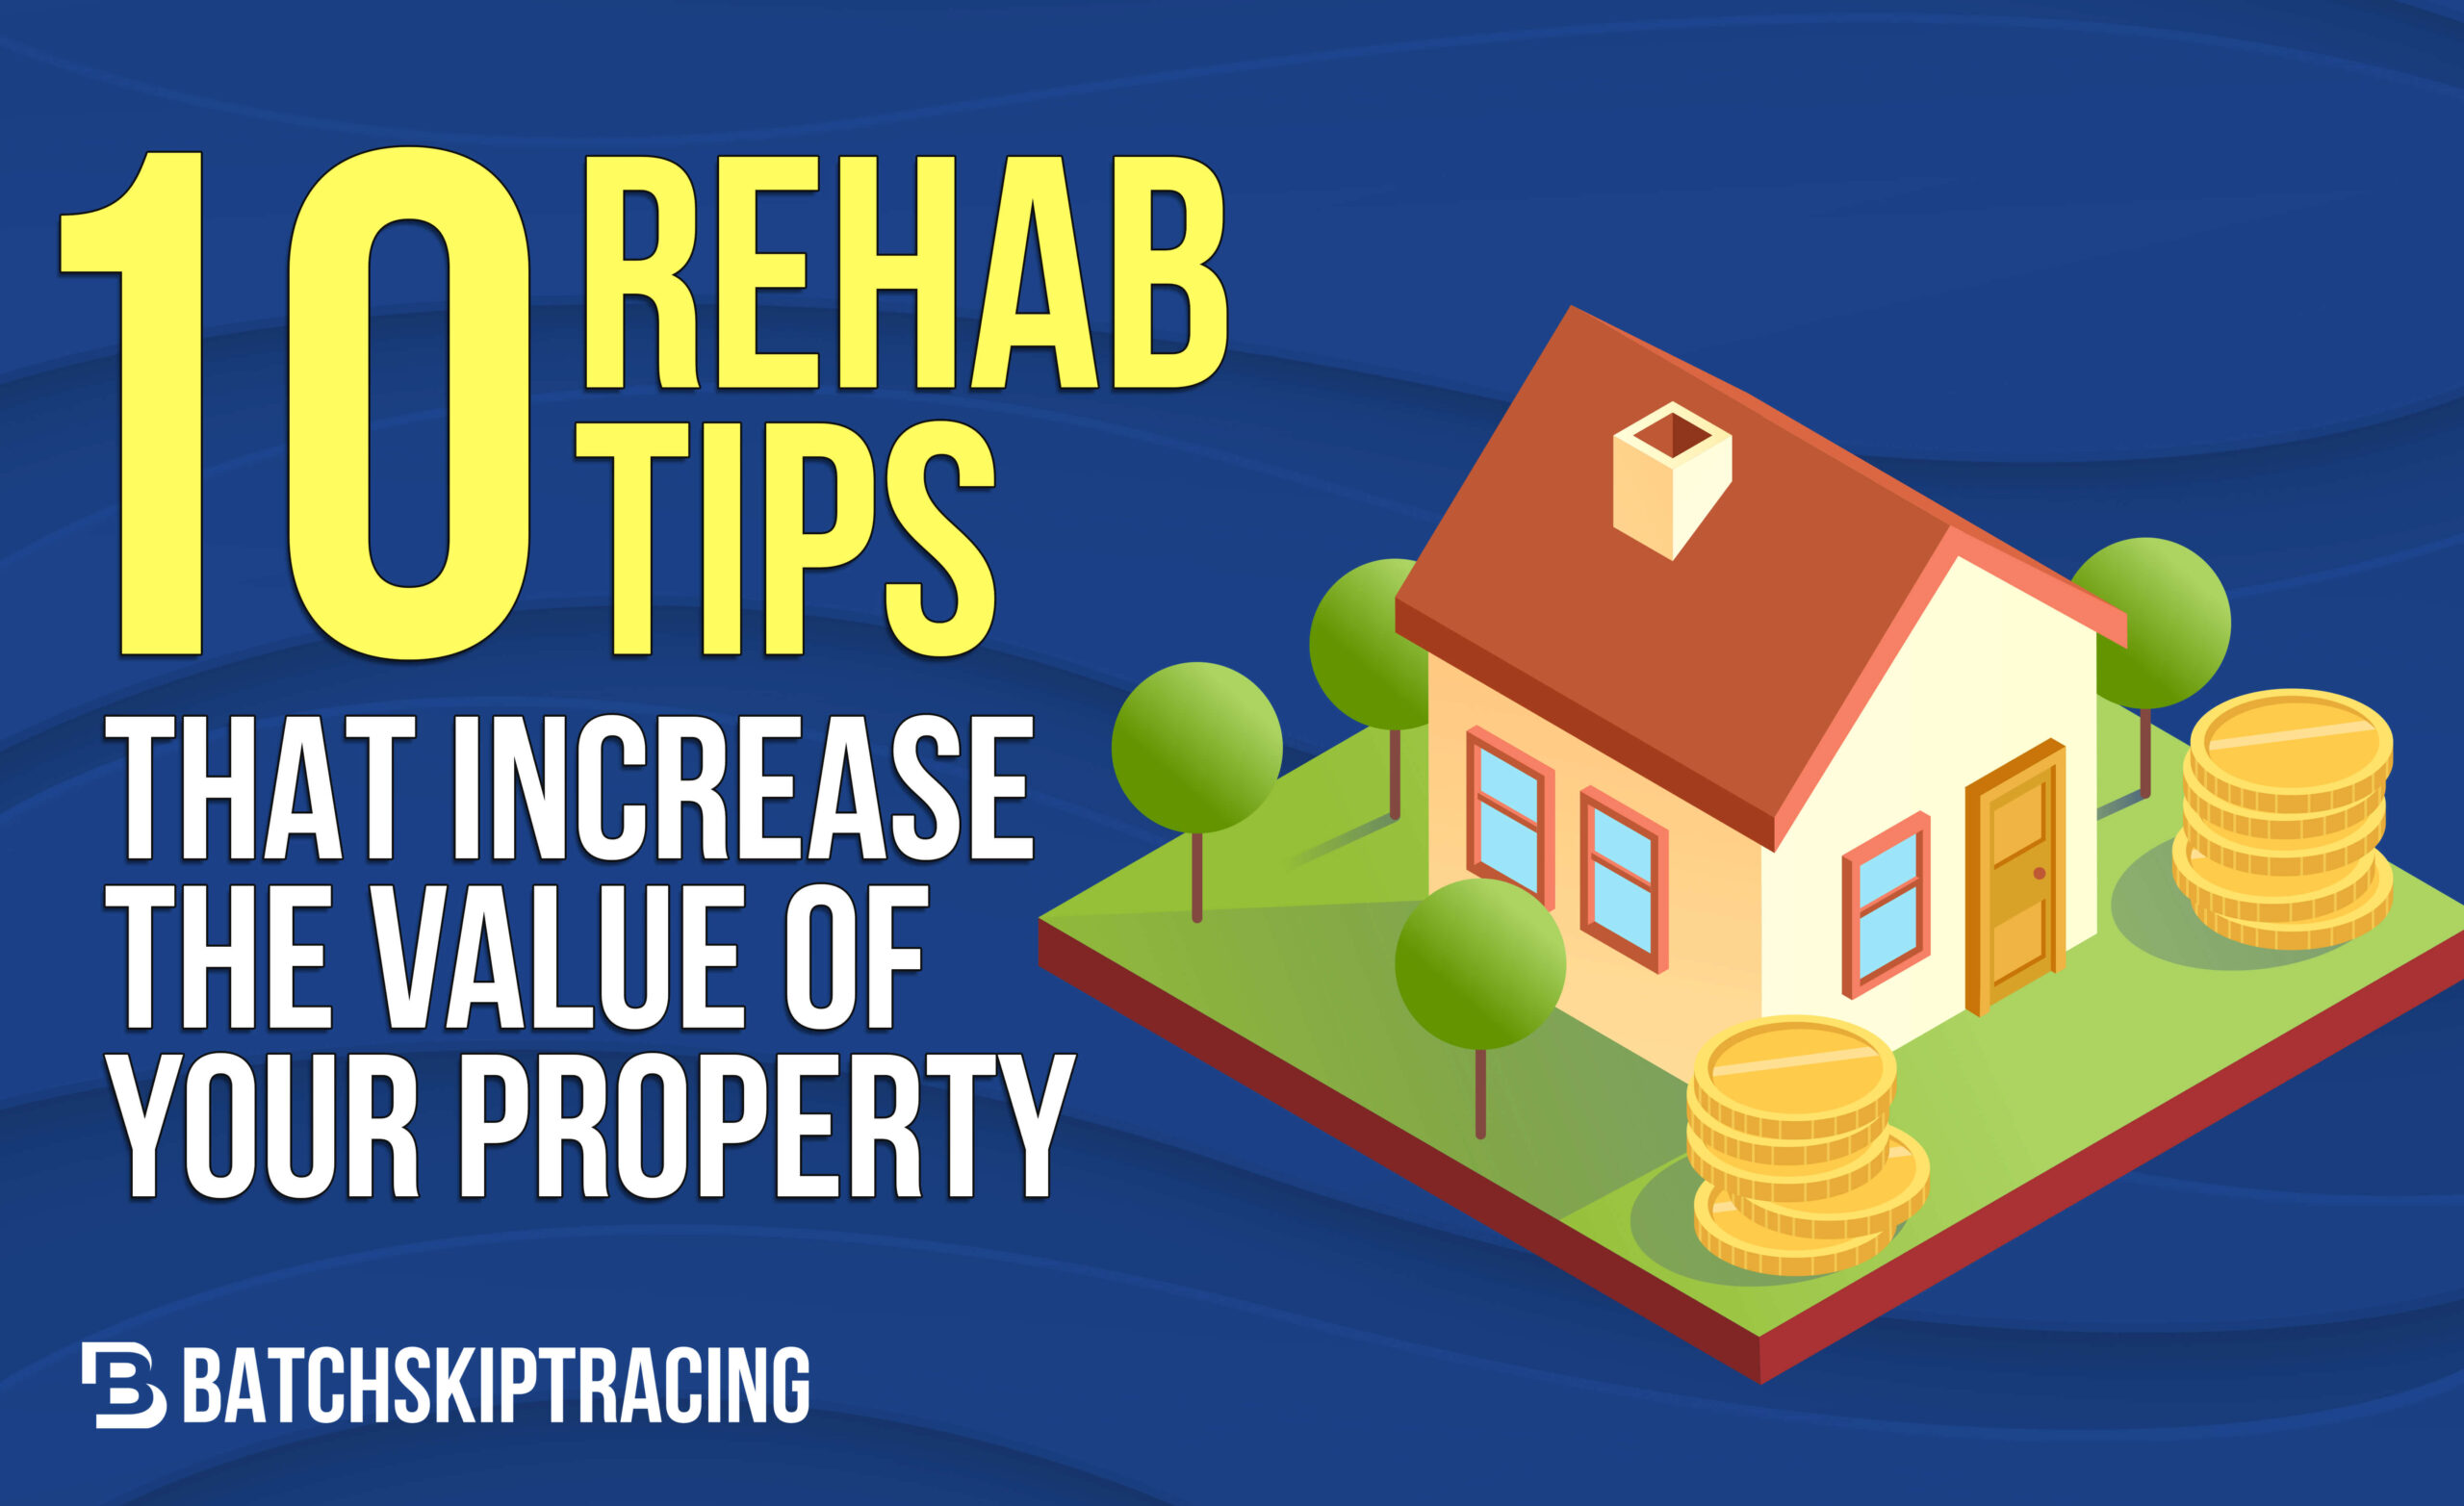 10 Rehab Tips That Increase The Value Of Your Property